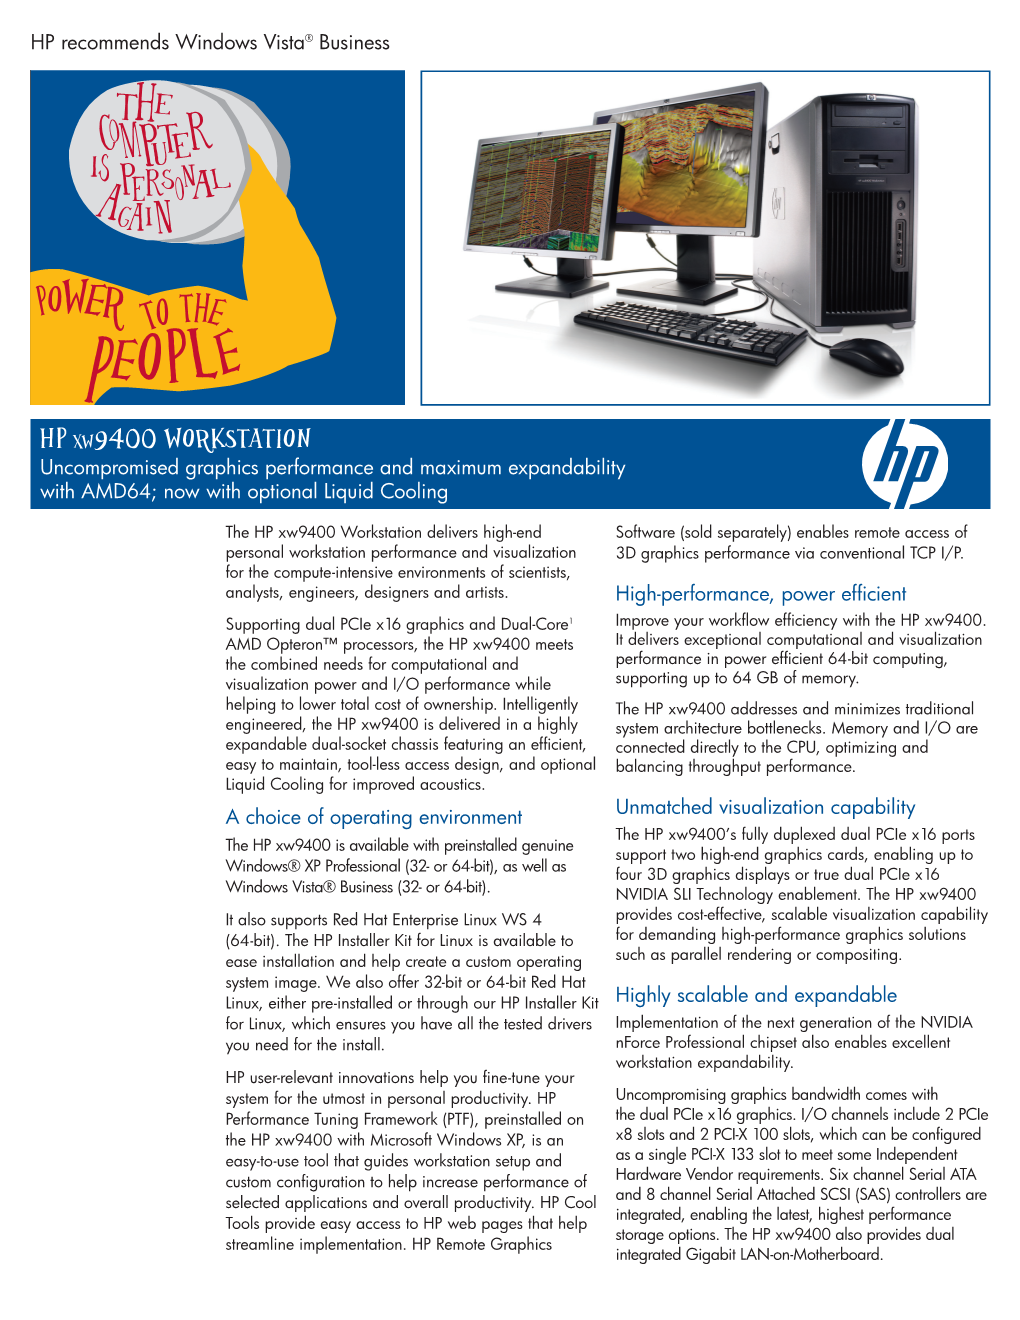 HP Xw9400 Workstation Uncompromised Graphics Performance and Maximum Expandability with AMD64; Now with Optional Liquid Cooling